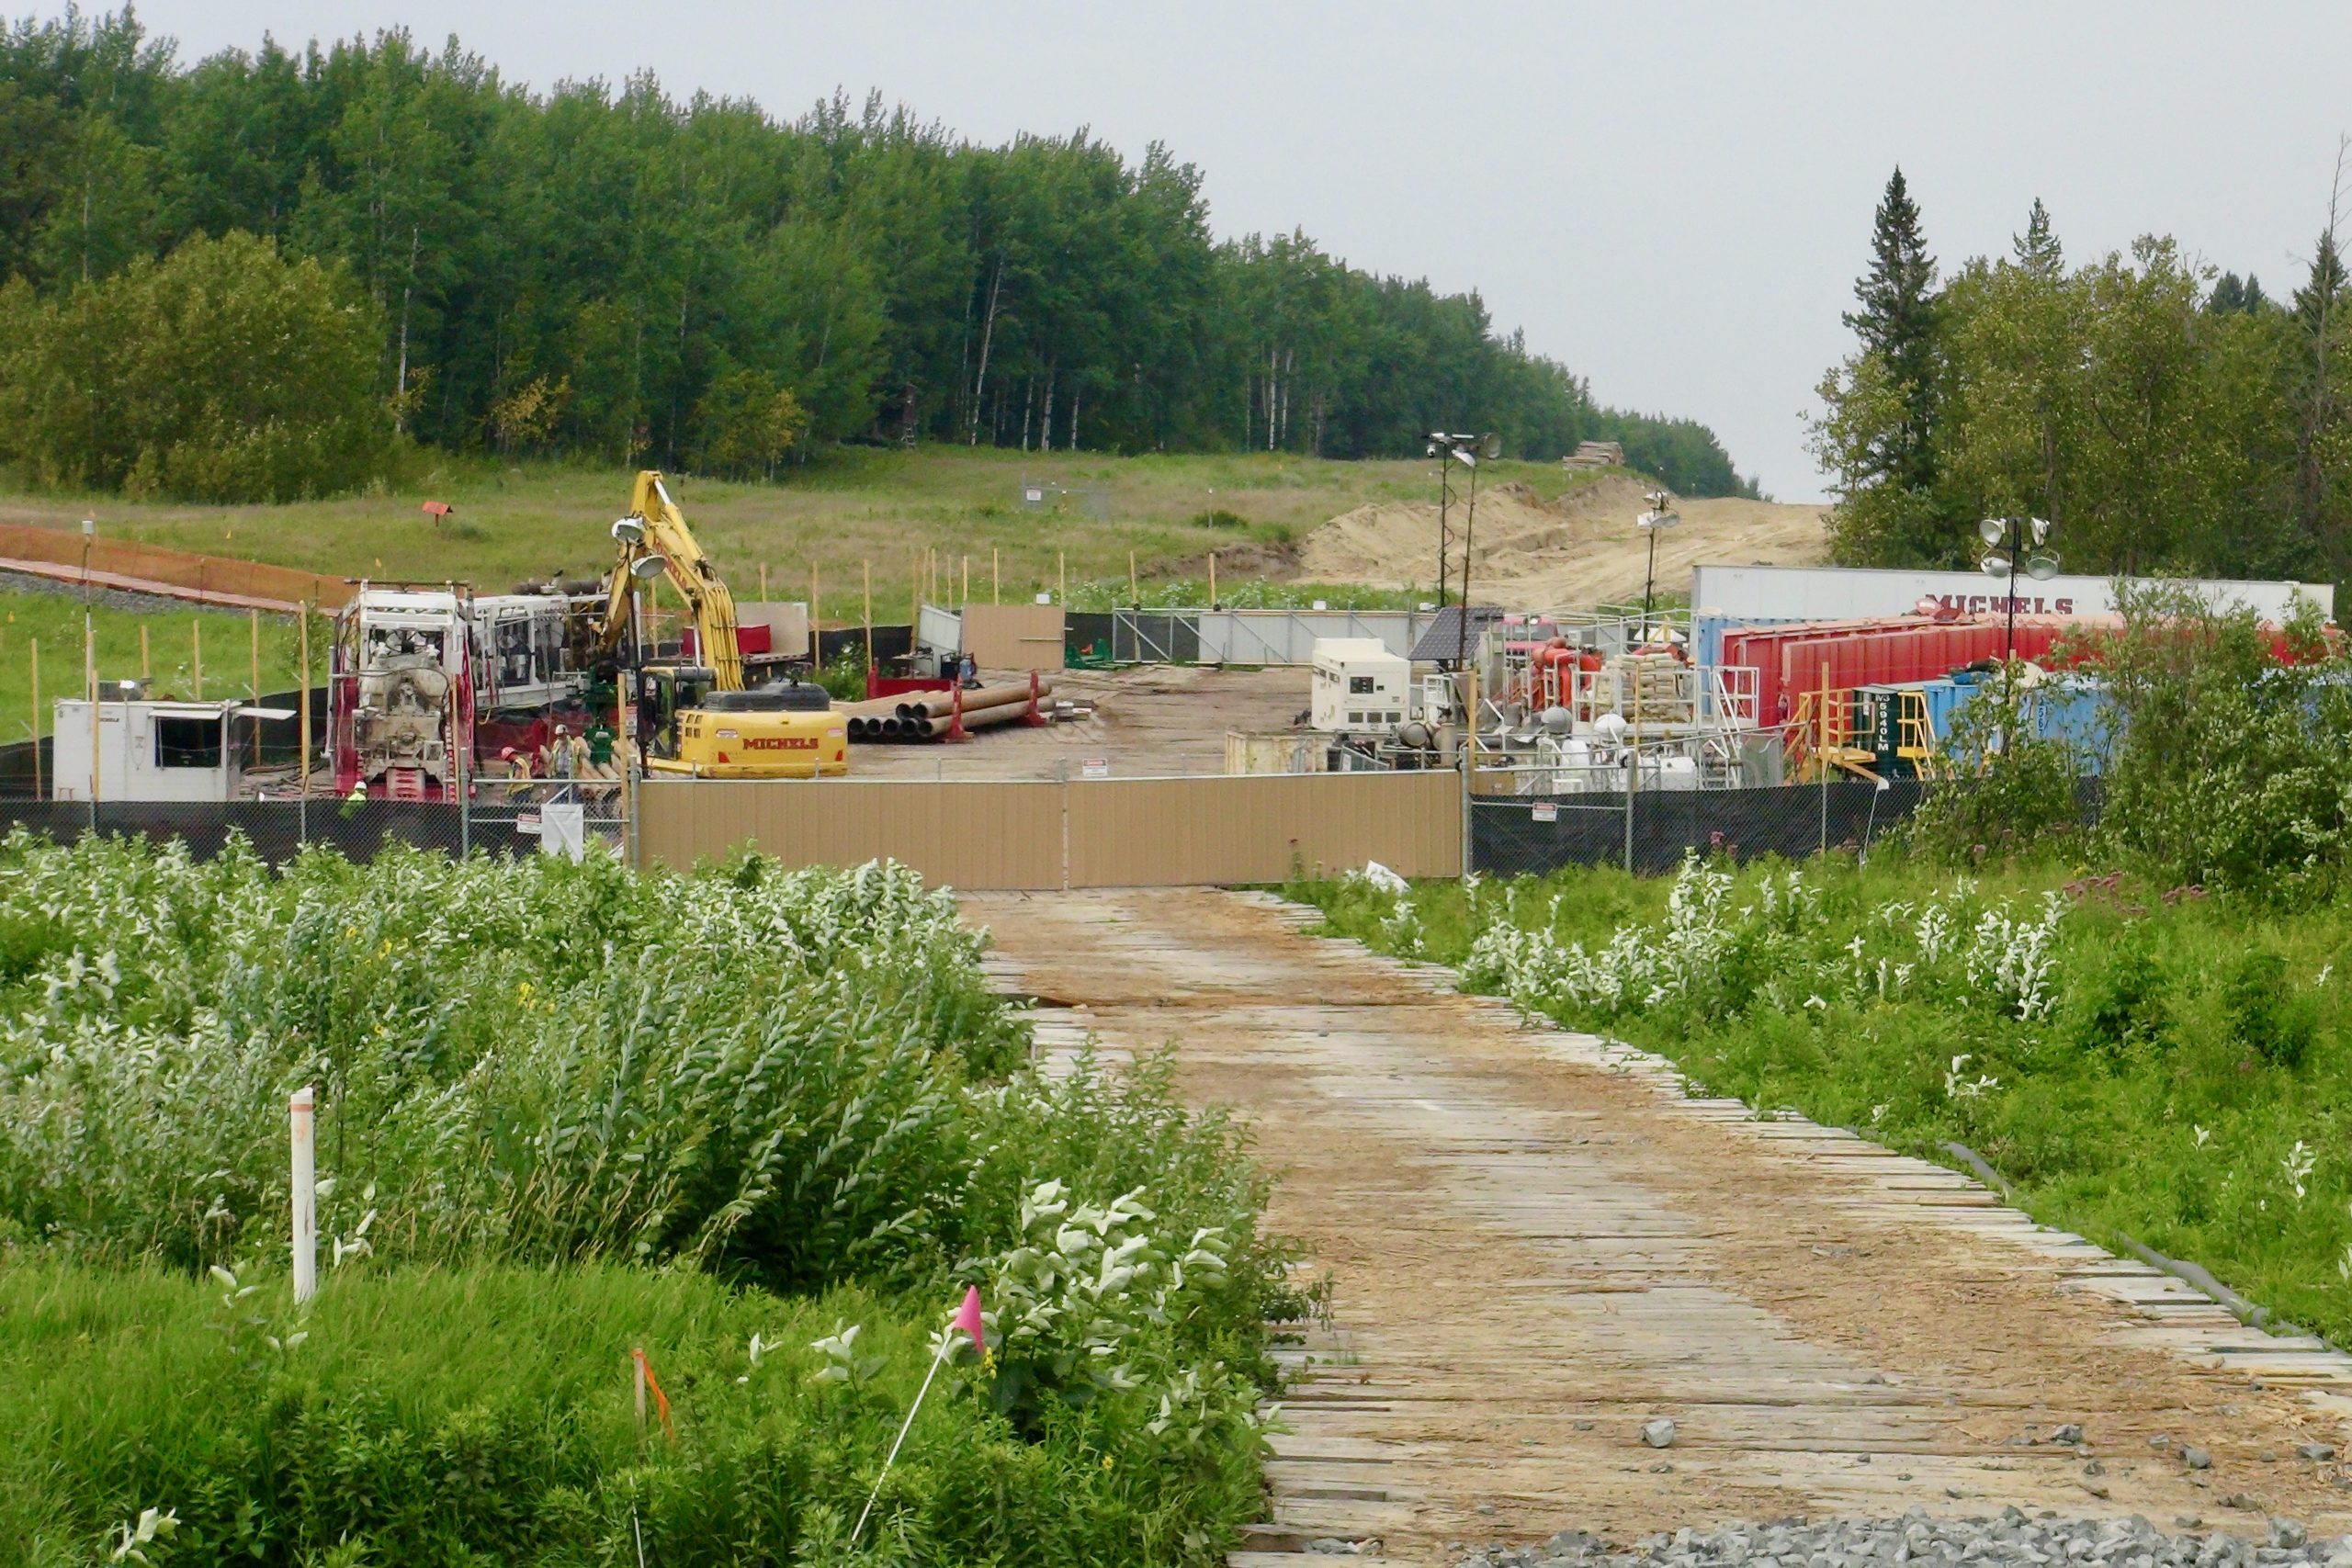 Enbridge drilling and pumping worksite near Coffee Pot Landing on the Upper Mississippi River.